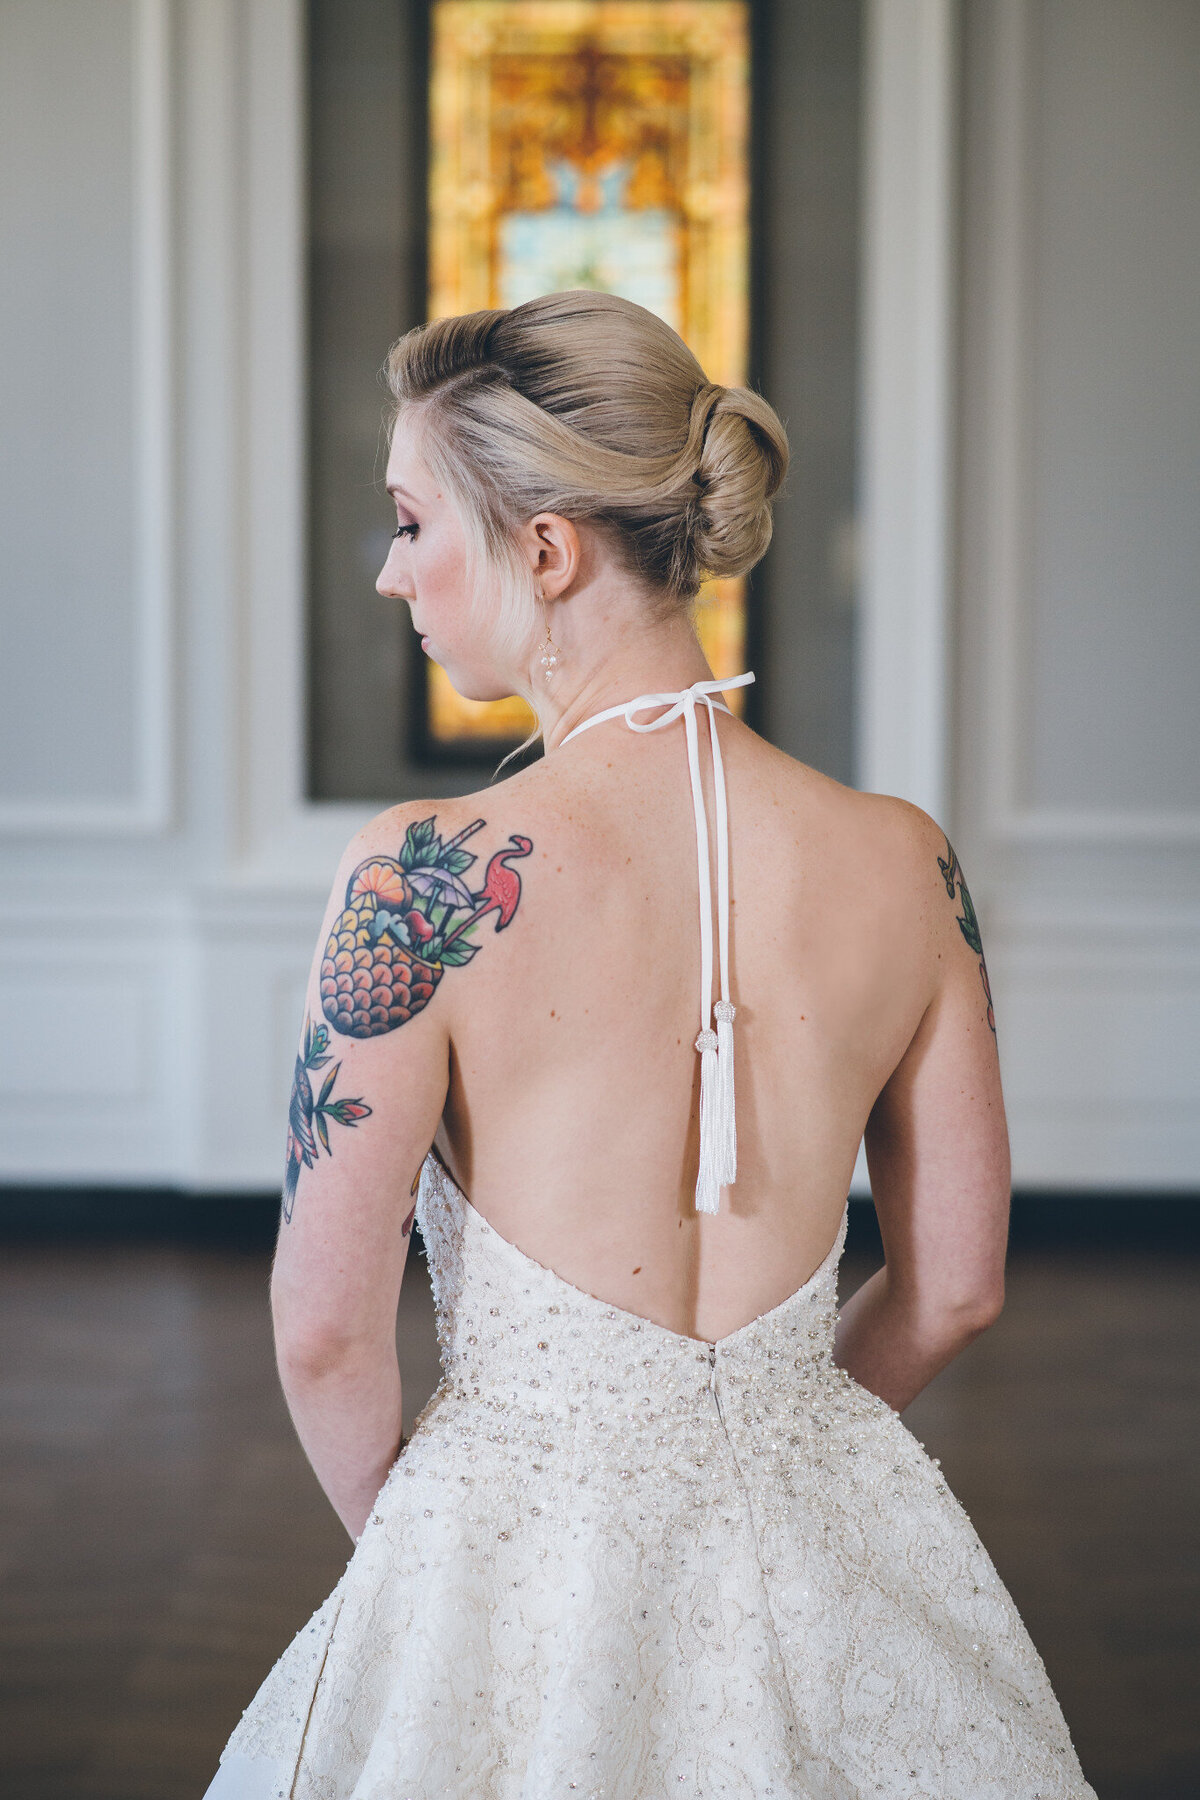 The halter top of the Karli wedding dress style creates an open back. The hand-beaded tassels on the ends of the halter ties hang down the middle of the back.